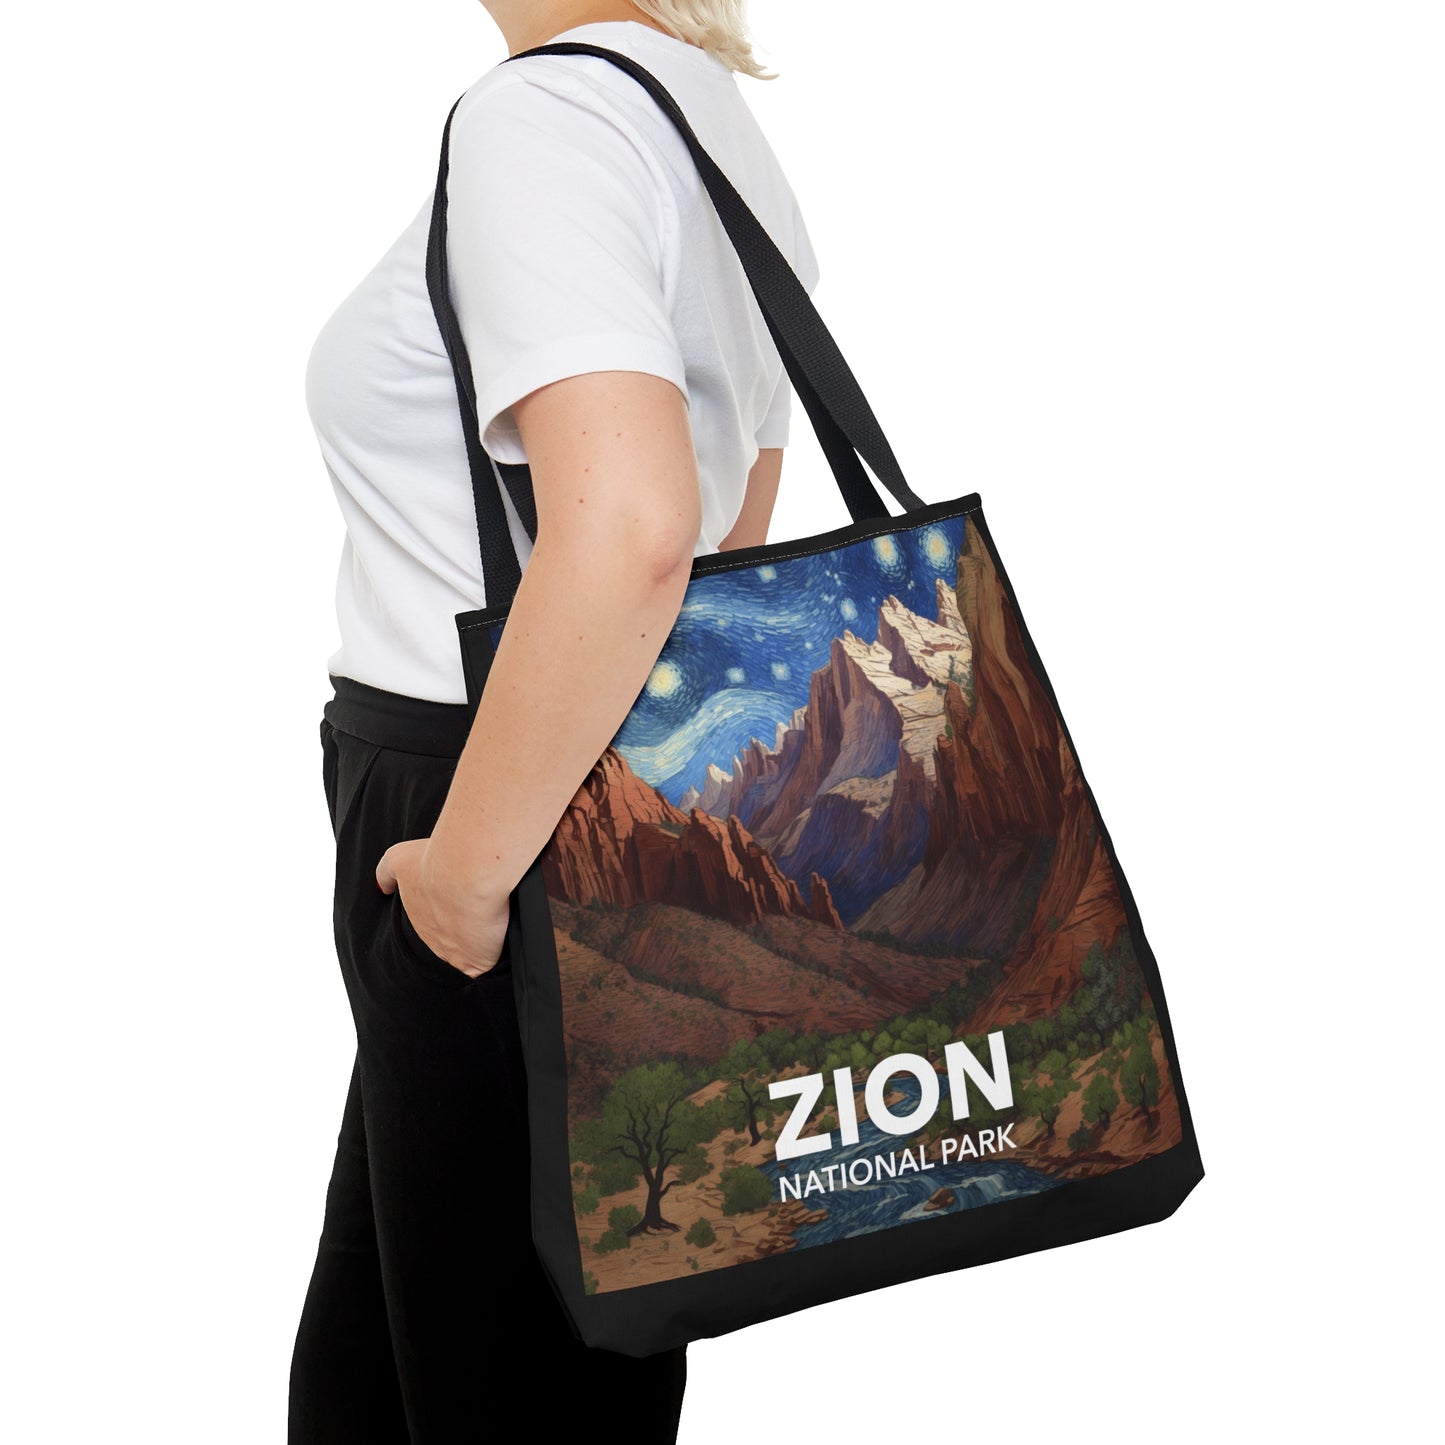 Zion National Park Tote Bag - The Starry Night